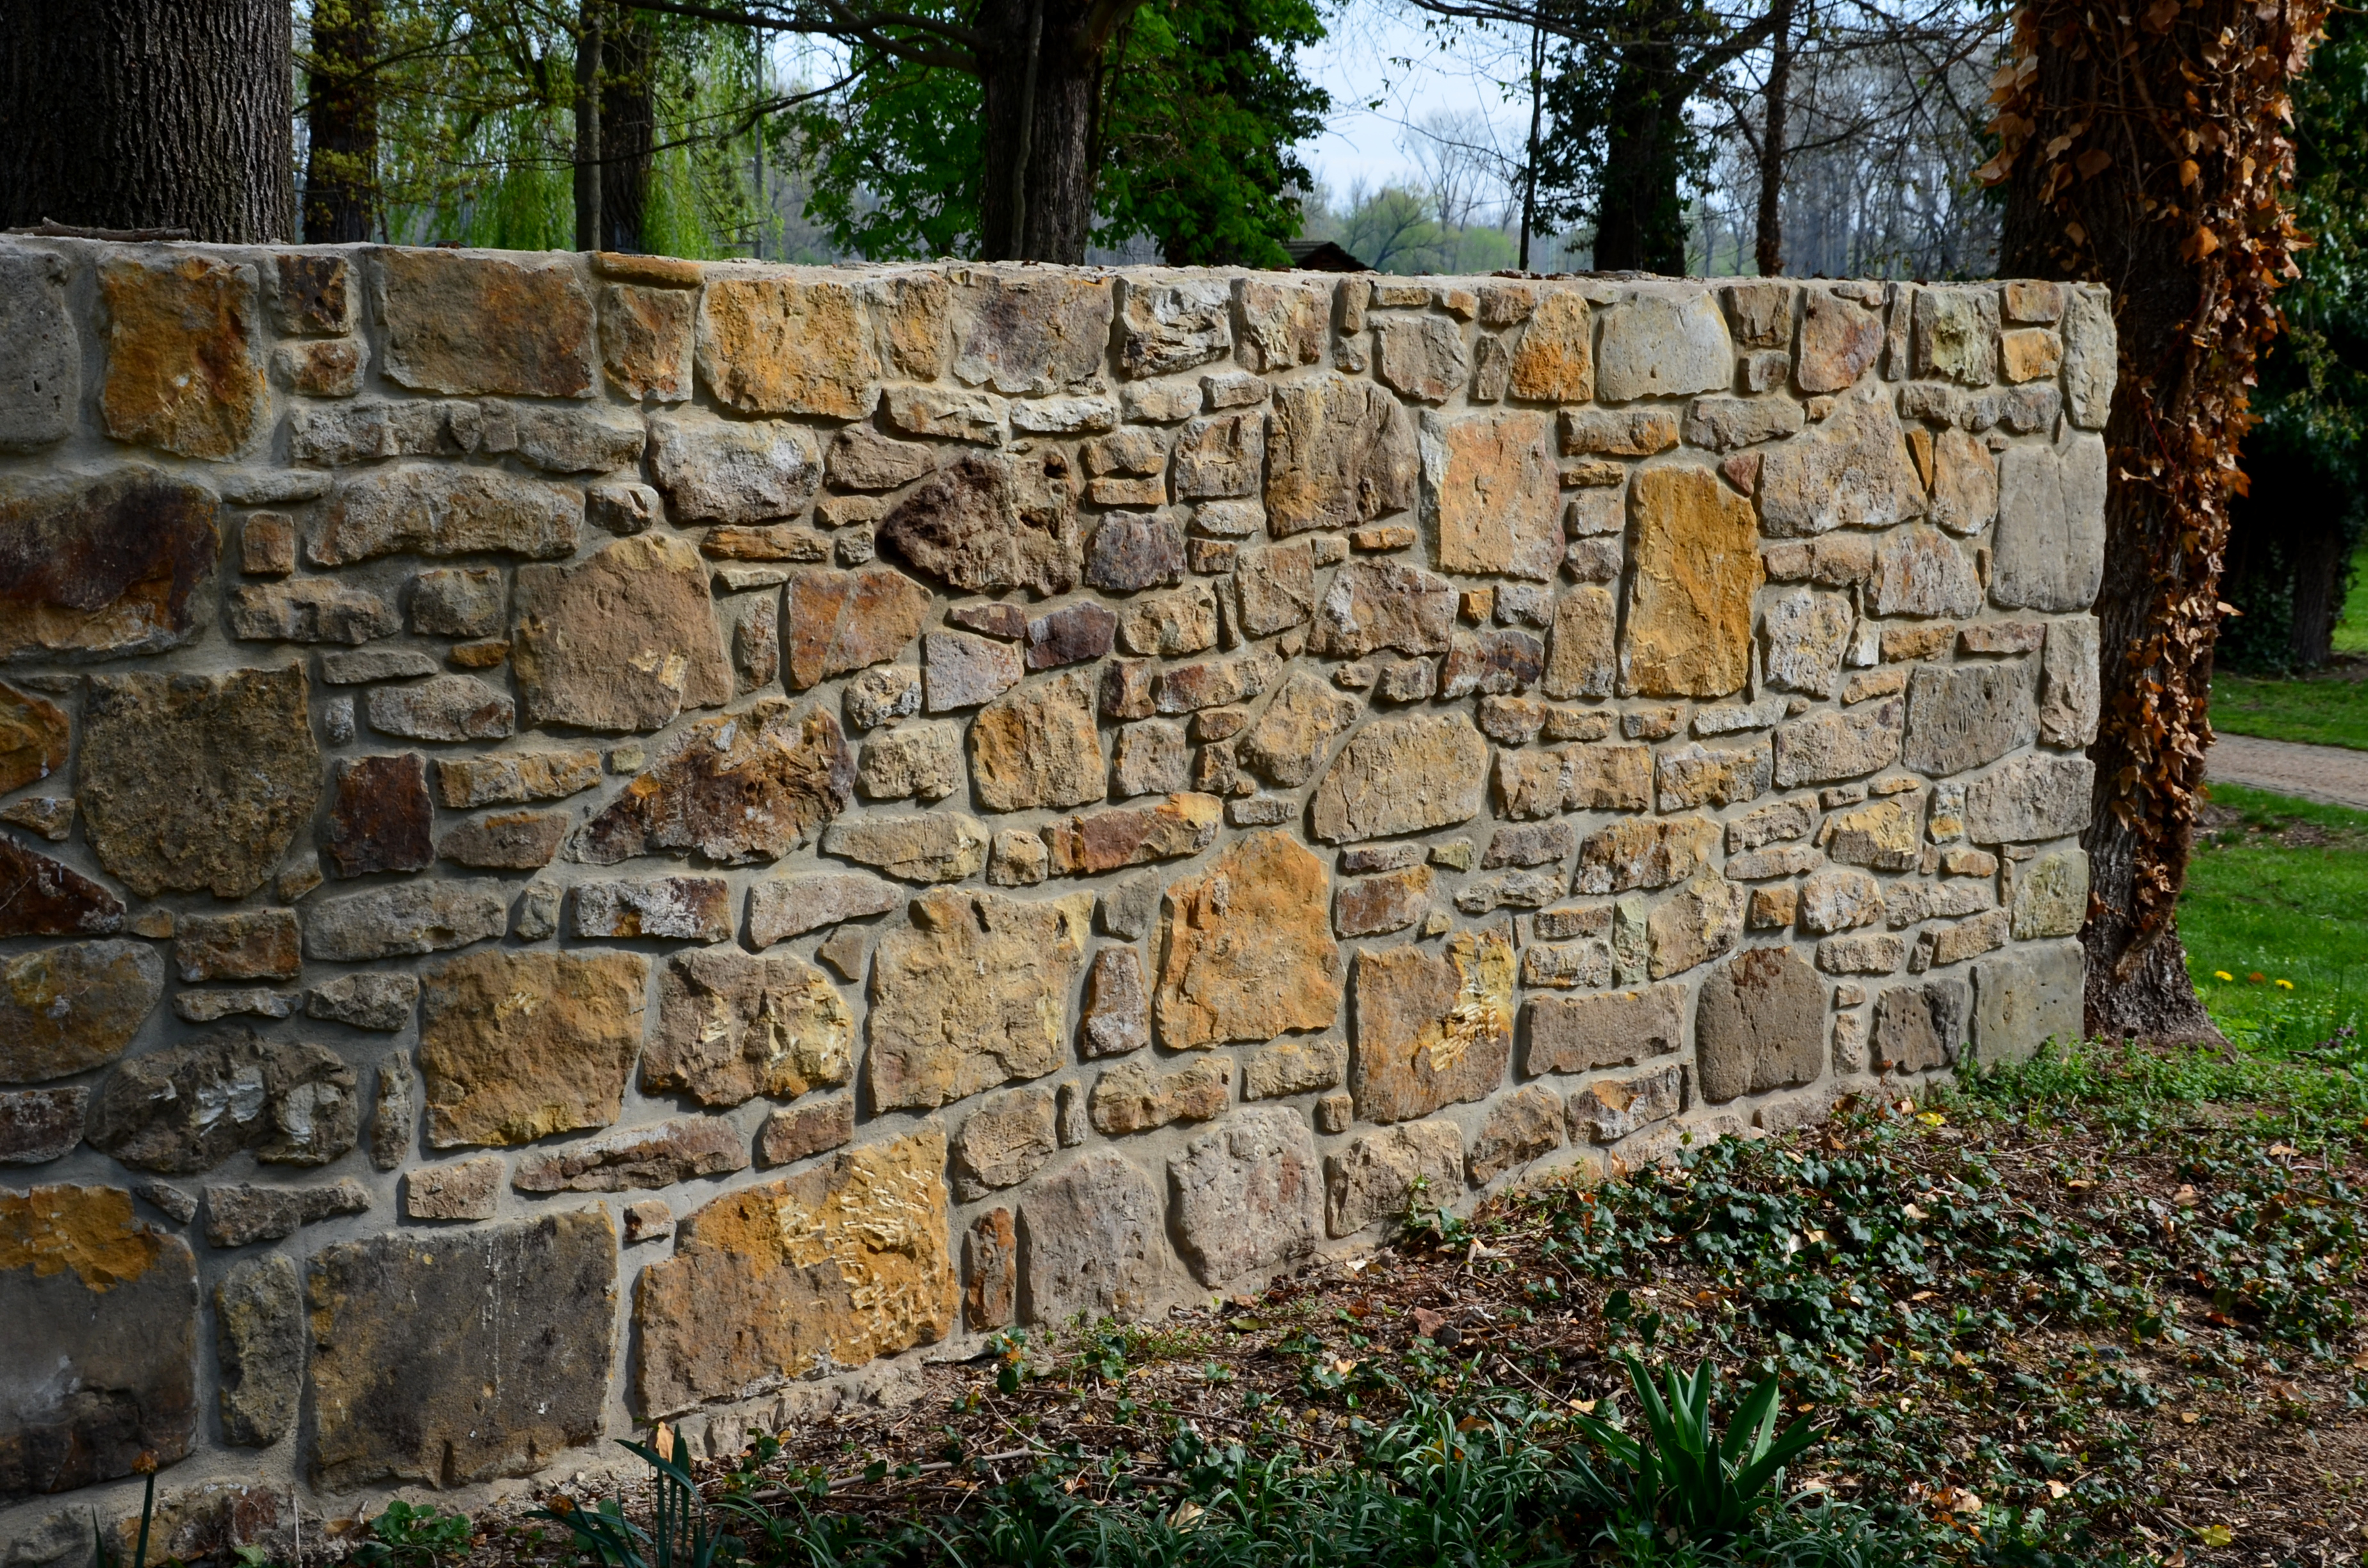 What Type of Mortar Do You Use for a Stacked Rock Wall?